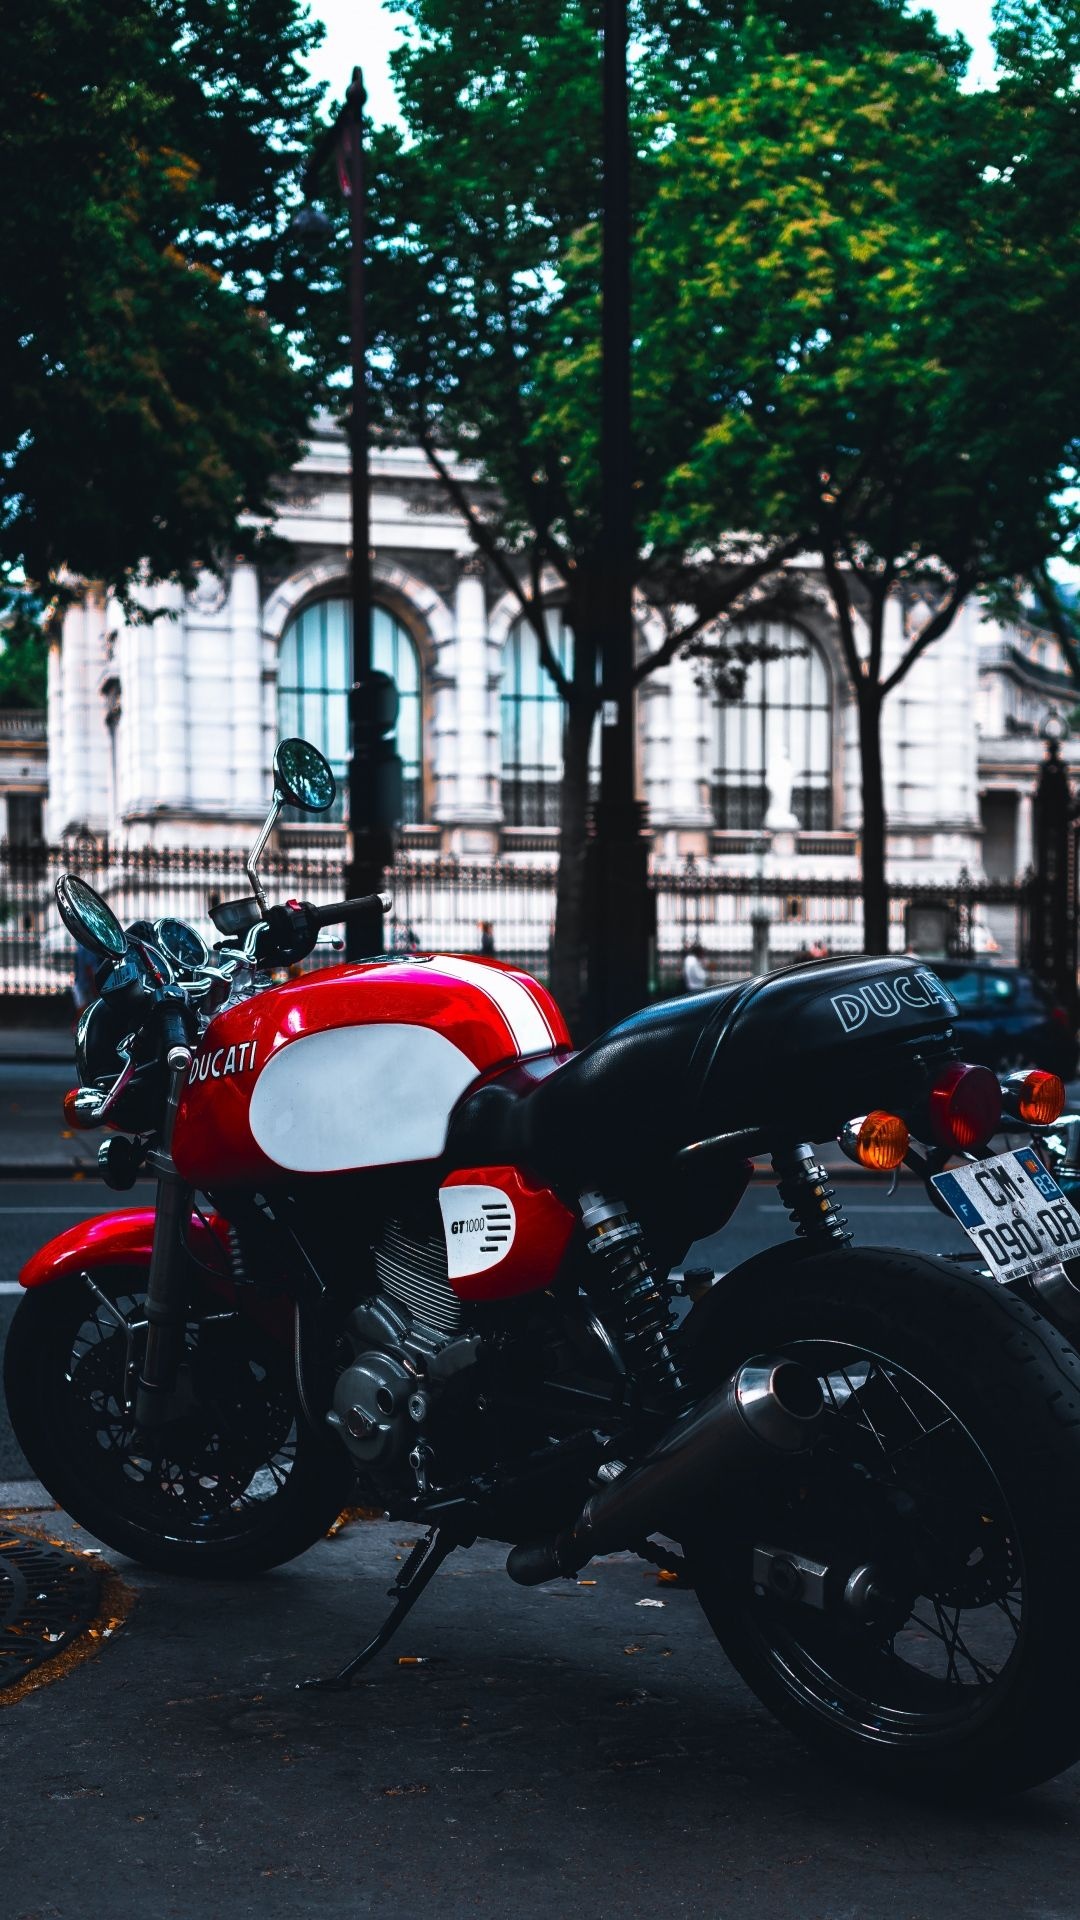 Street Bike, Motorcycle wallpapers, Rider's dream, Freedom of the open road, 1080x1920 Full HD Handy